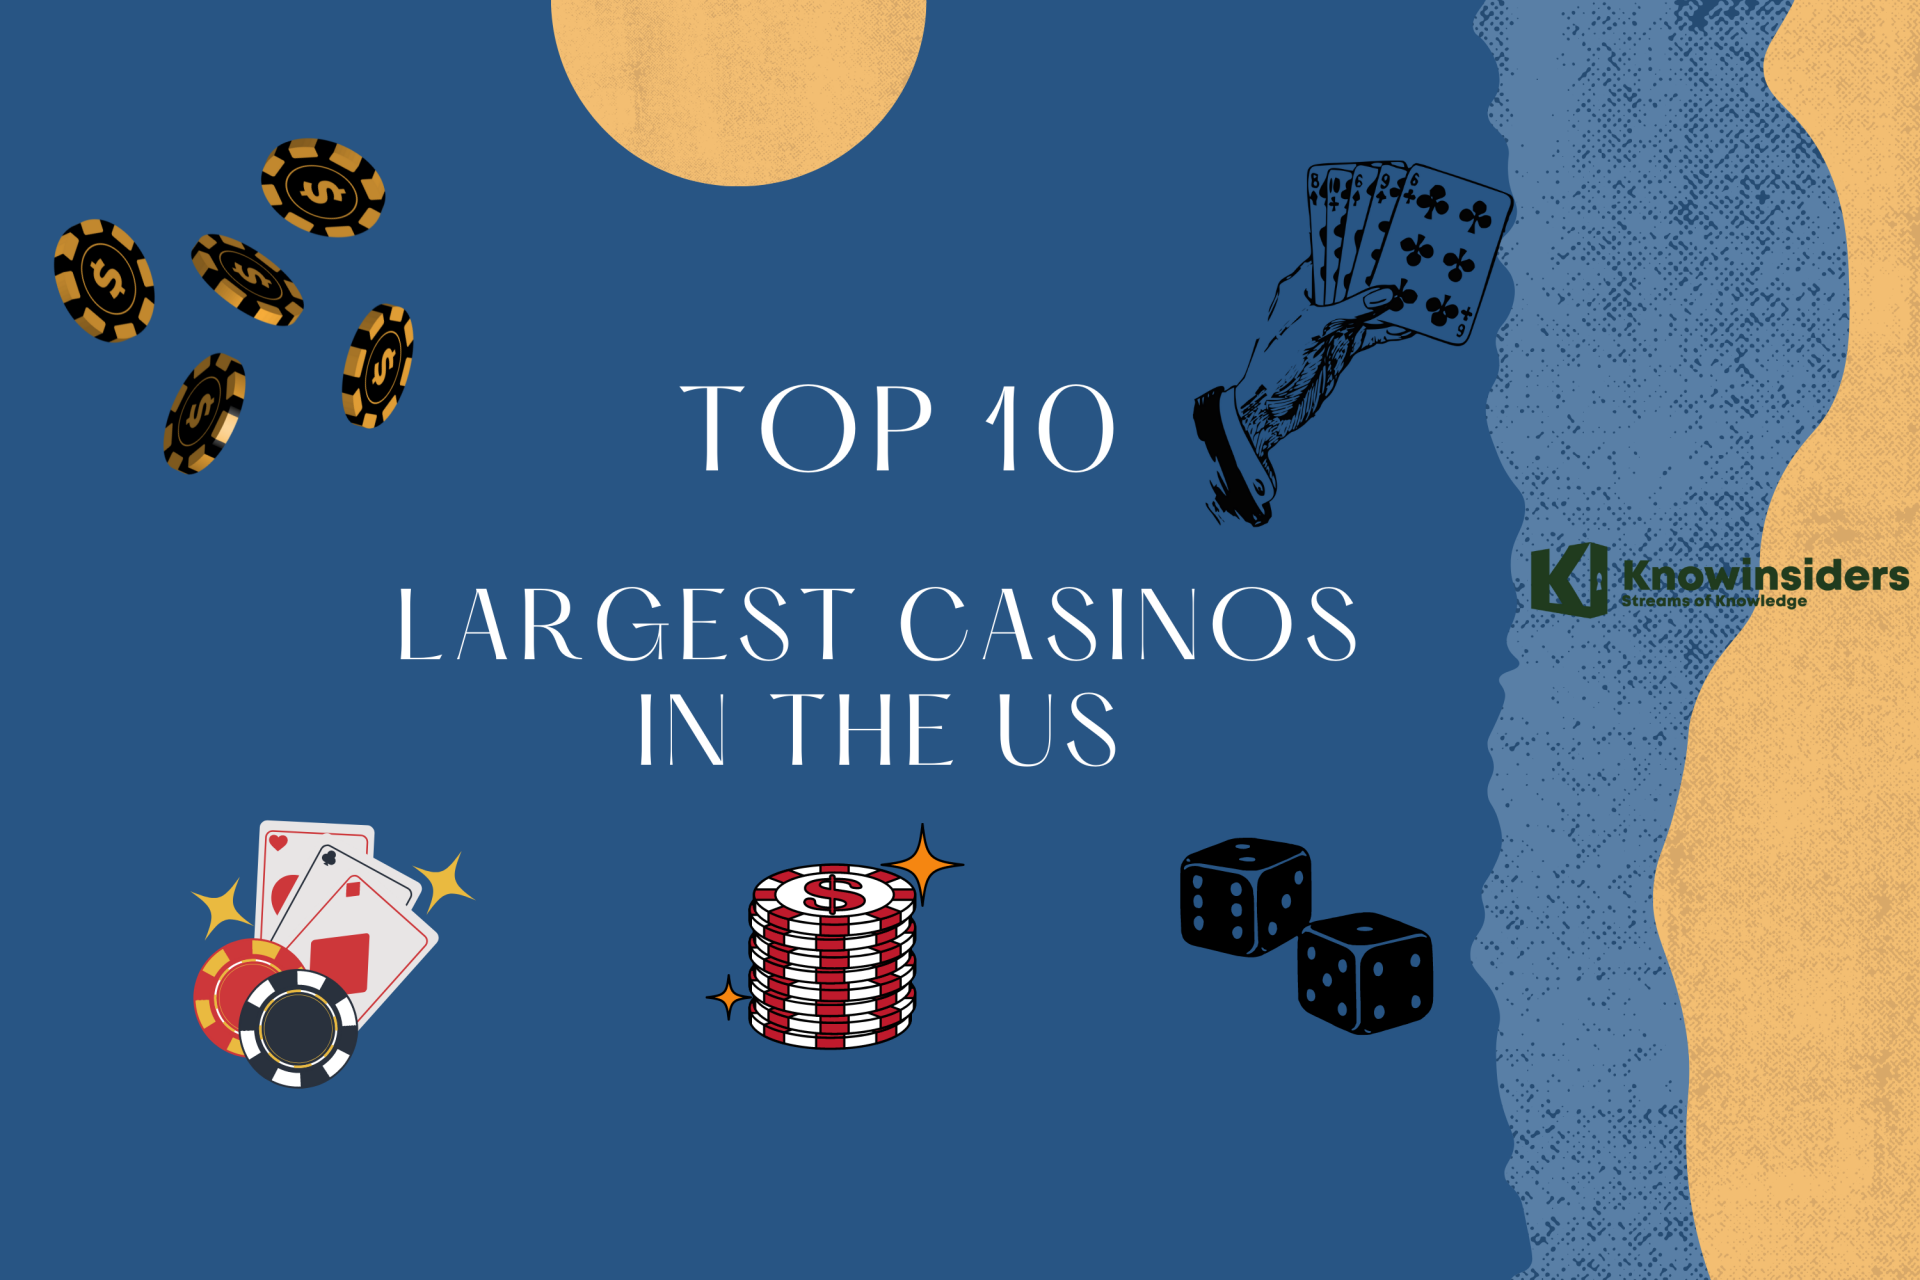 Top 10 Largest Casinos In The US